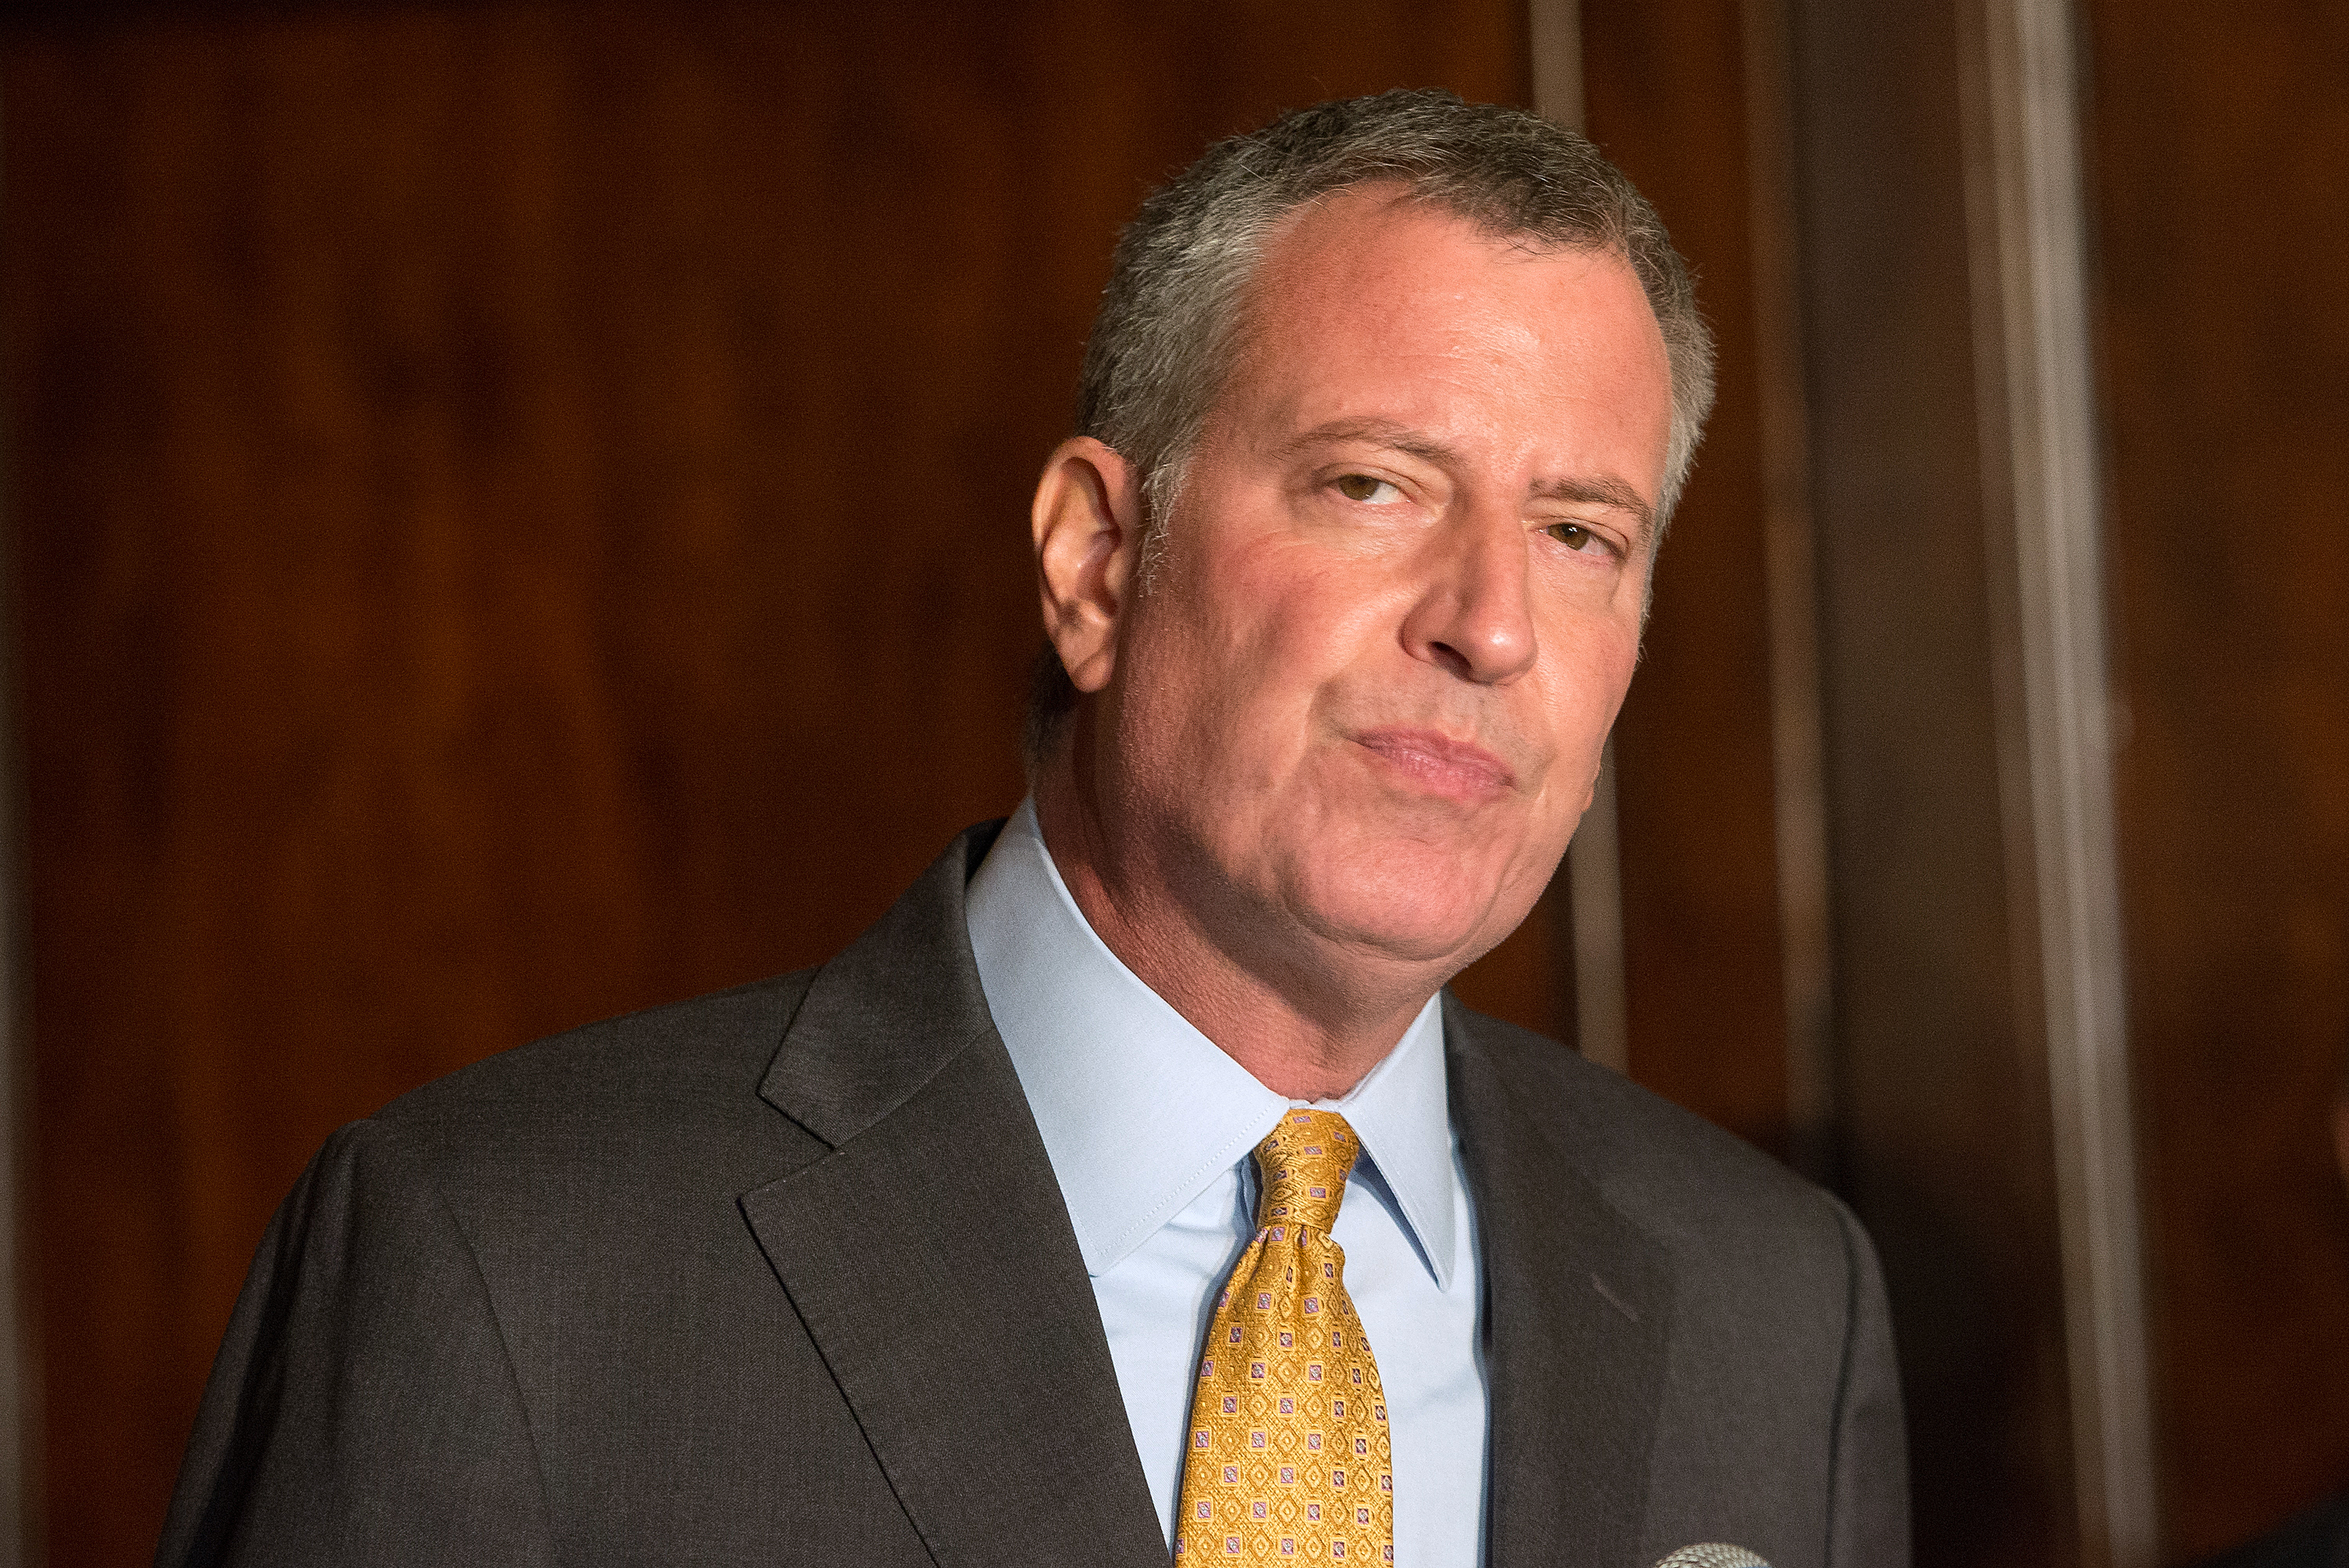 New York City Mayor Bill de Blasio attends the Answer the Call 30th Anniversary Gala at The Waldorf Astoria on October 22, 2015 in New York City. (Mike Pont&mdash;WireImage/Getty Images)